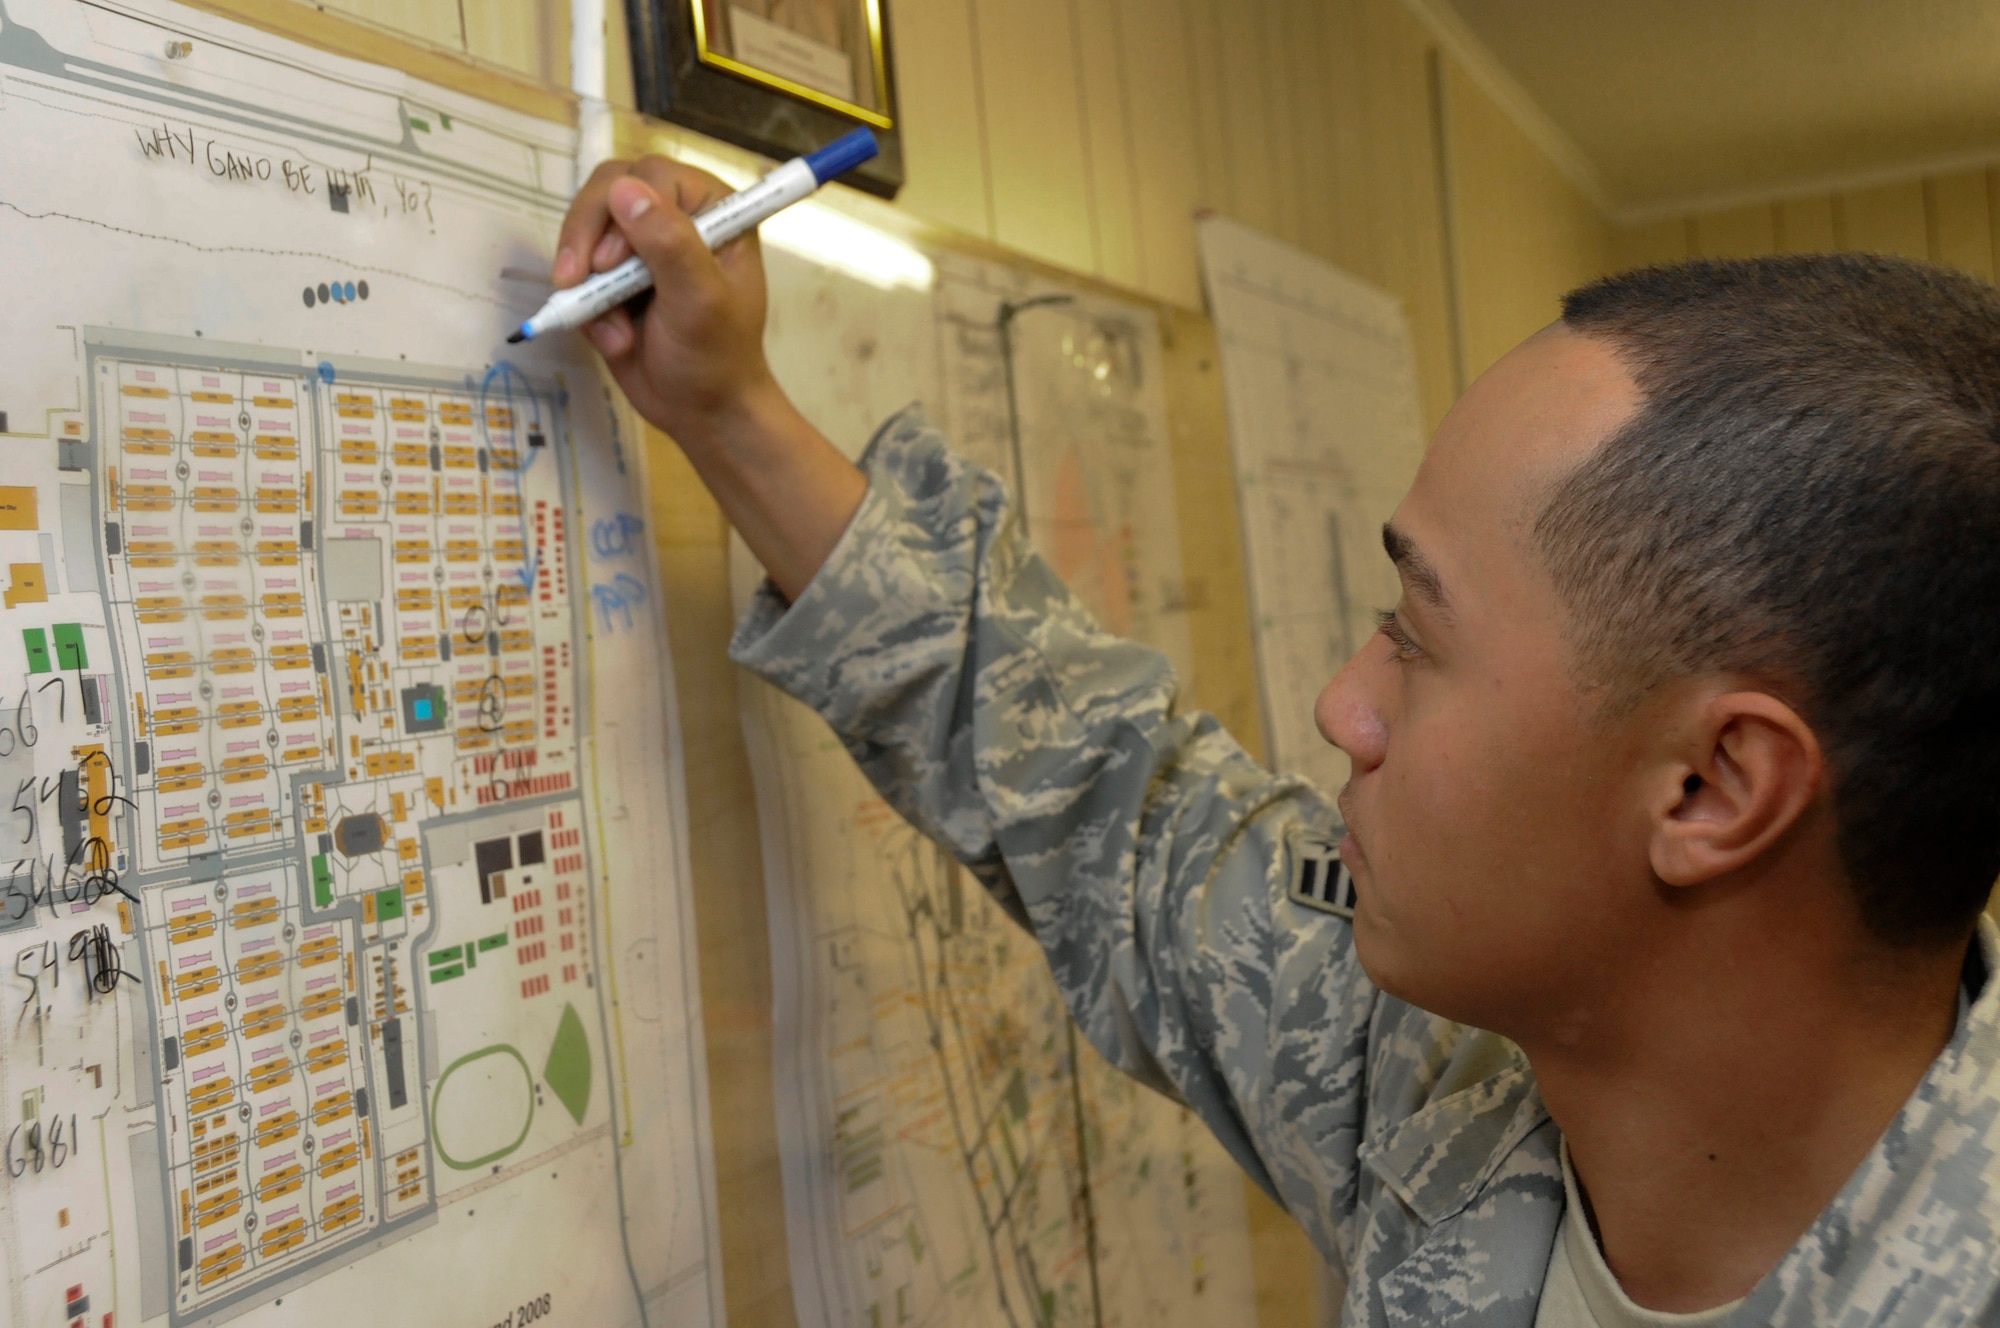 Staff Sgt. Eric Proctor, 379th Expeditionary Security Forces Squadron, manually plots a cordon on a base map for a simulated unexploded ordinance discovery, October 31, at an undisclosed air base in Southwest Asia.  The entry control points are marked varying by the size and type of the ordinance.  The ability to manually set up a controlled area must be maintained in case of power or computer failure.  Sergeant Proctor is a native of Washington D.C., and is deployed from Schriever Air Force Base, Colo., in support of Operations Iraqi and Enduring Freedom and Joint Task Force-Horn of Africa.  (U.S. Air Force photo by Tech. Sgt. Michael Boquette/Released)